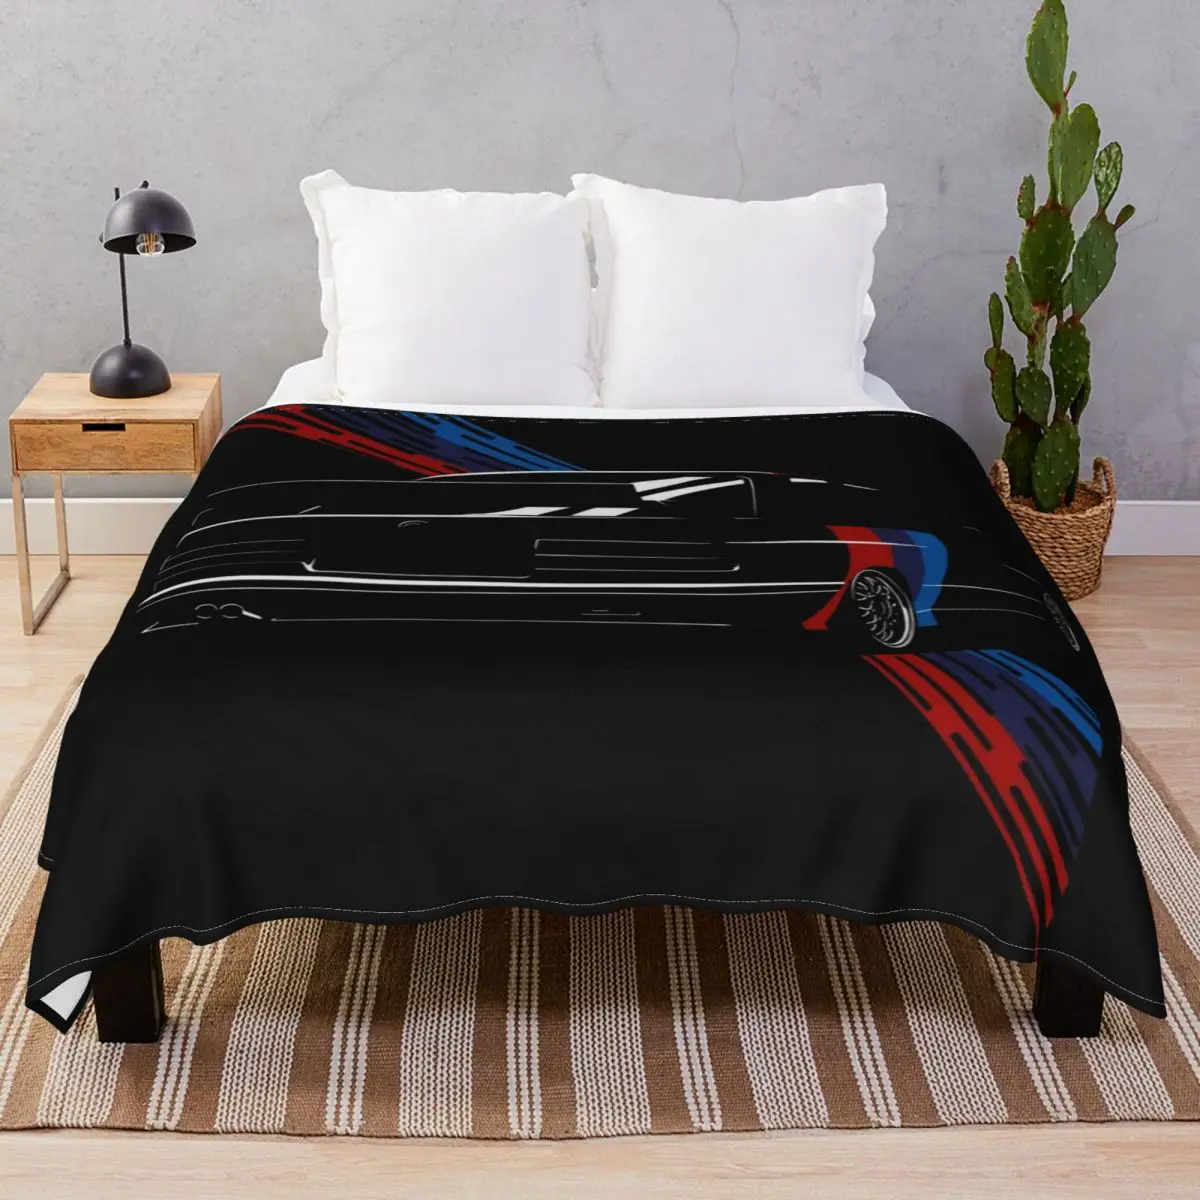 

The Touring Meister Blankets Fleece All Season Lightweight Thin Unisex Throw Blanket for Bedding Home Couch Travel Cinema